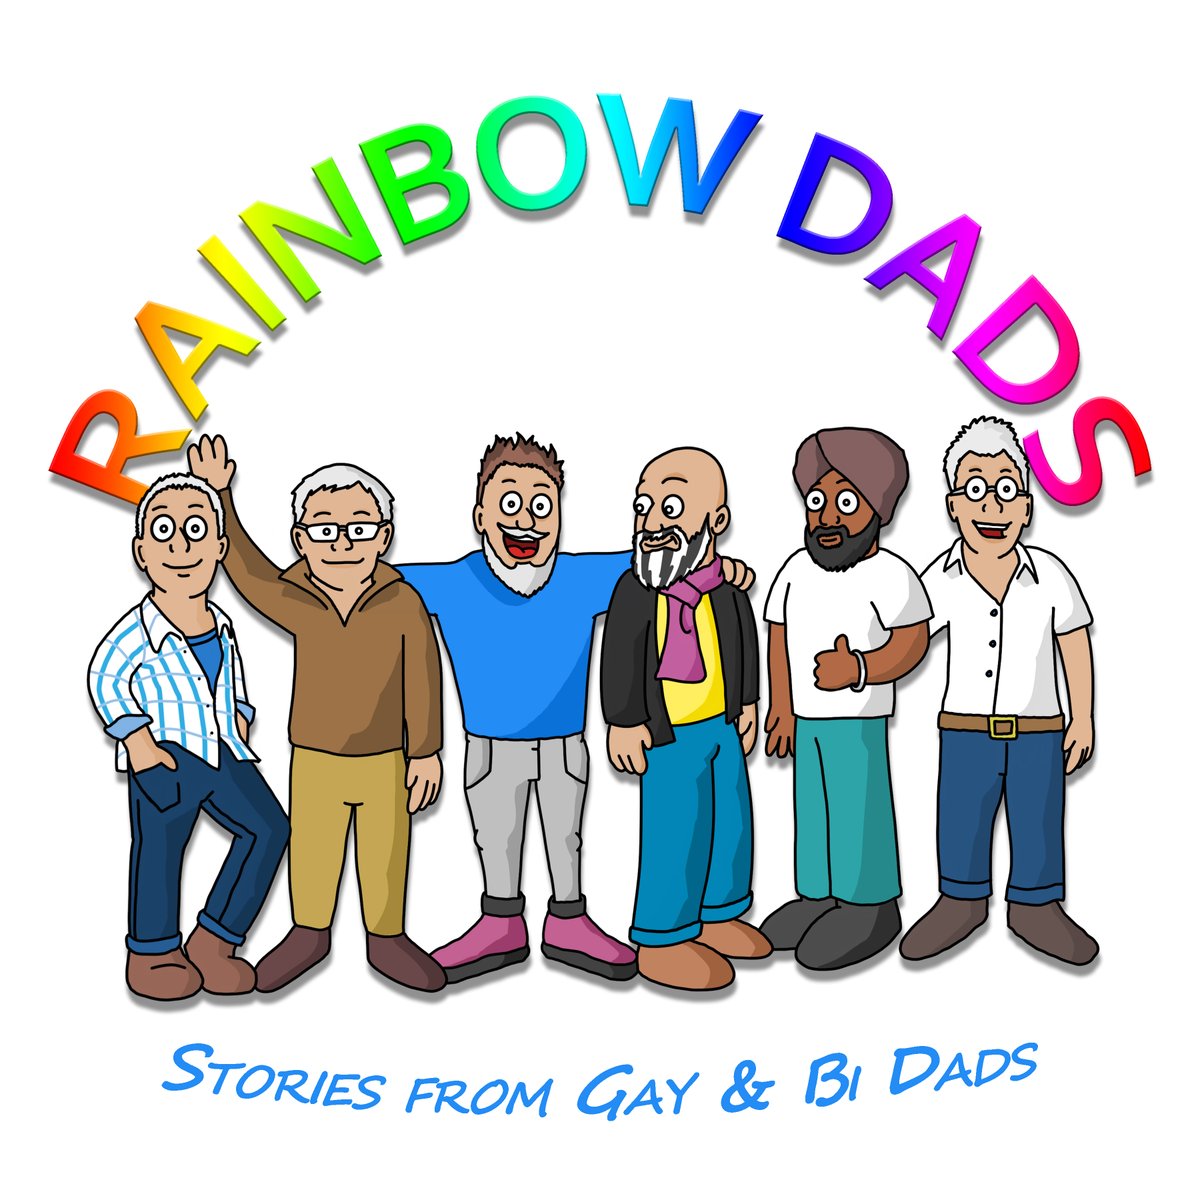 1. After listening to the incredibly heartwarming  @Rainbowdads  @NMcInerny I got thinking about parenting. What's out there? What are people talking about? THREAD Parenting podcasts 